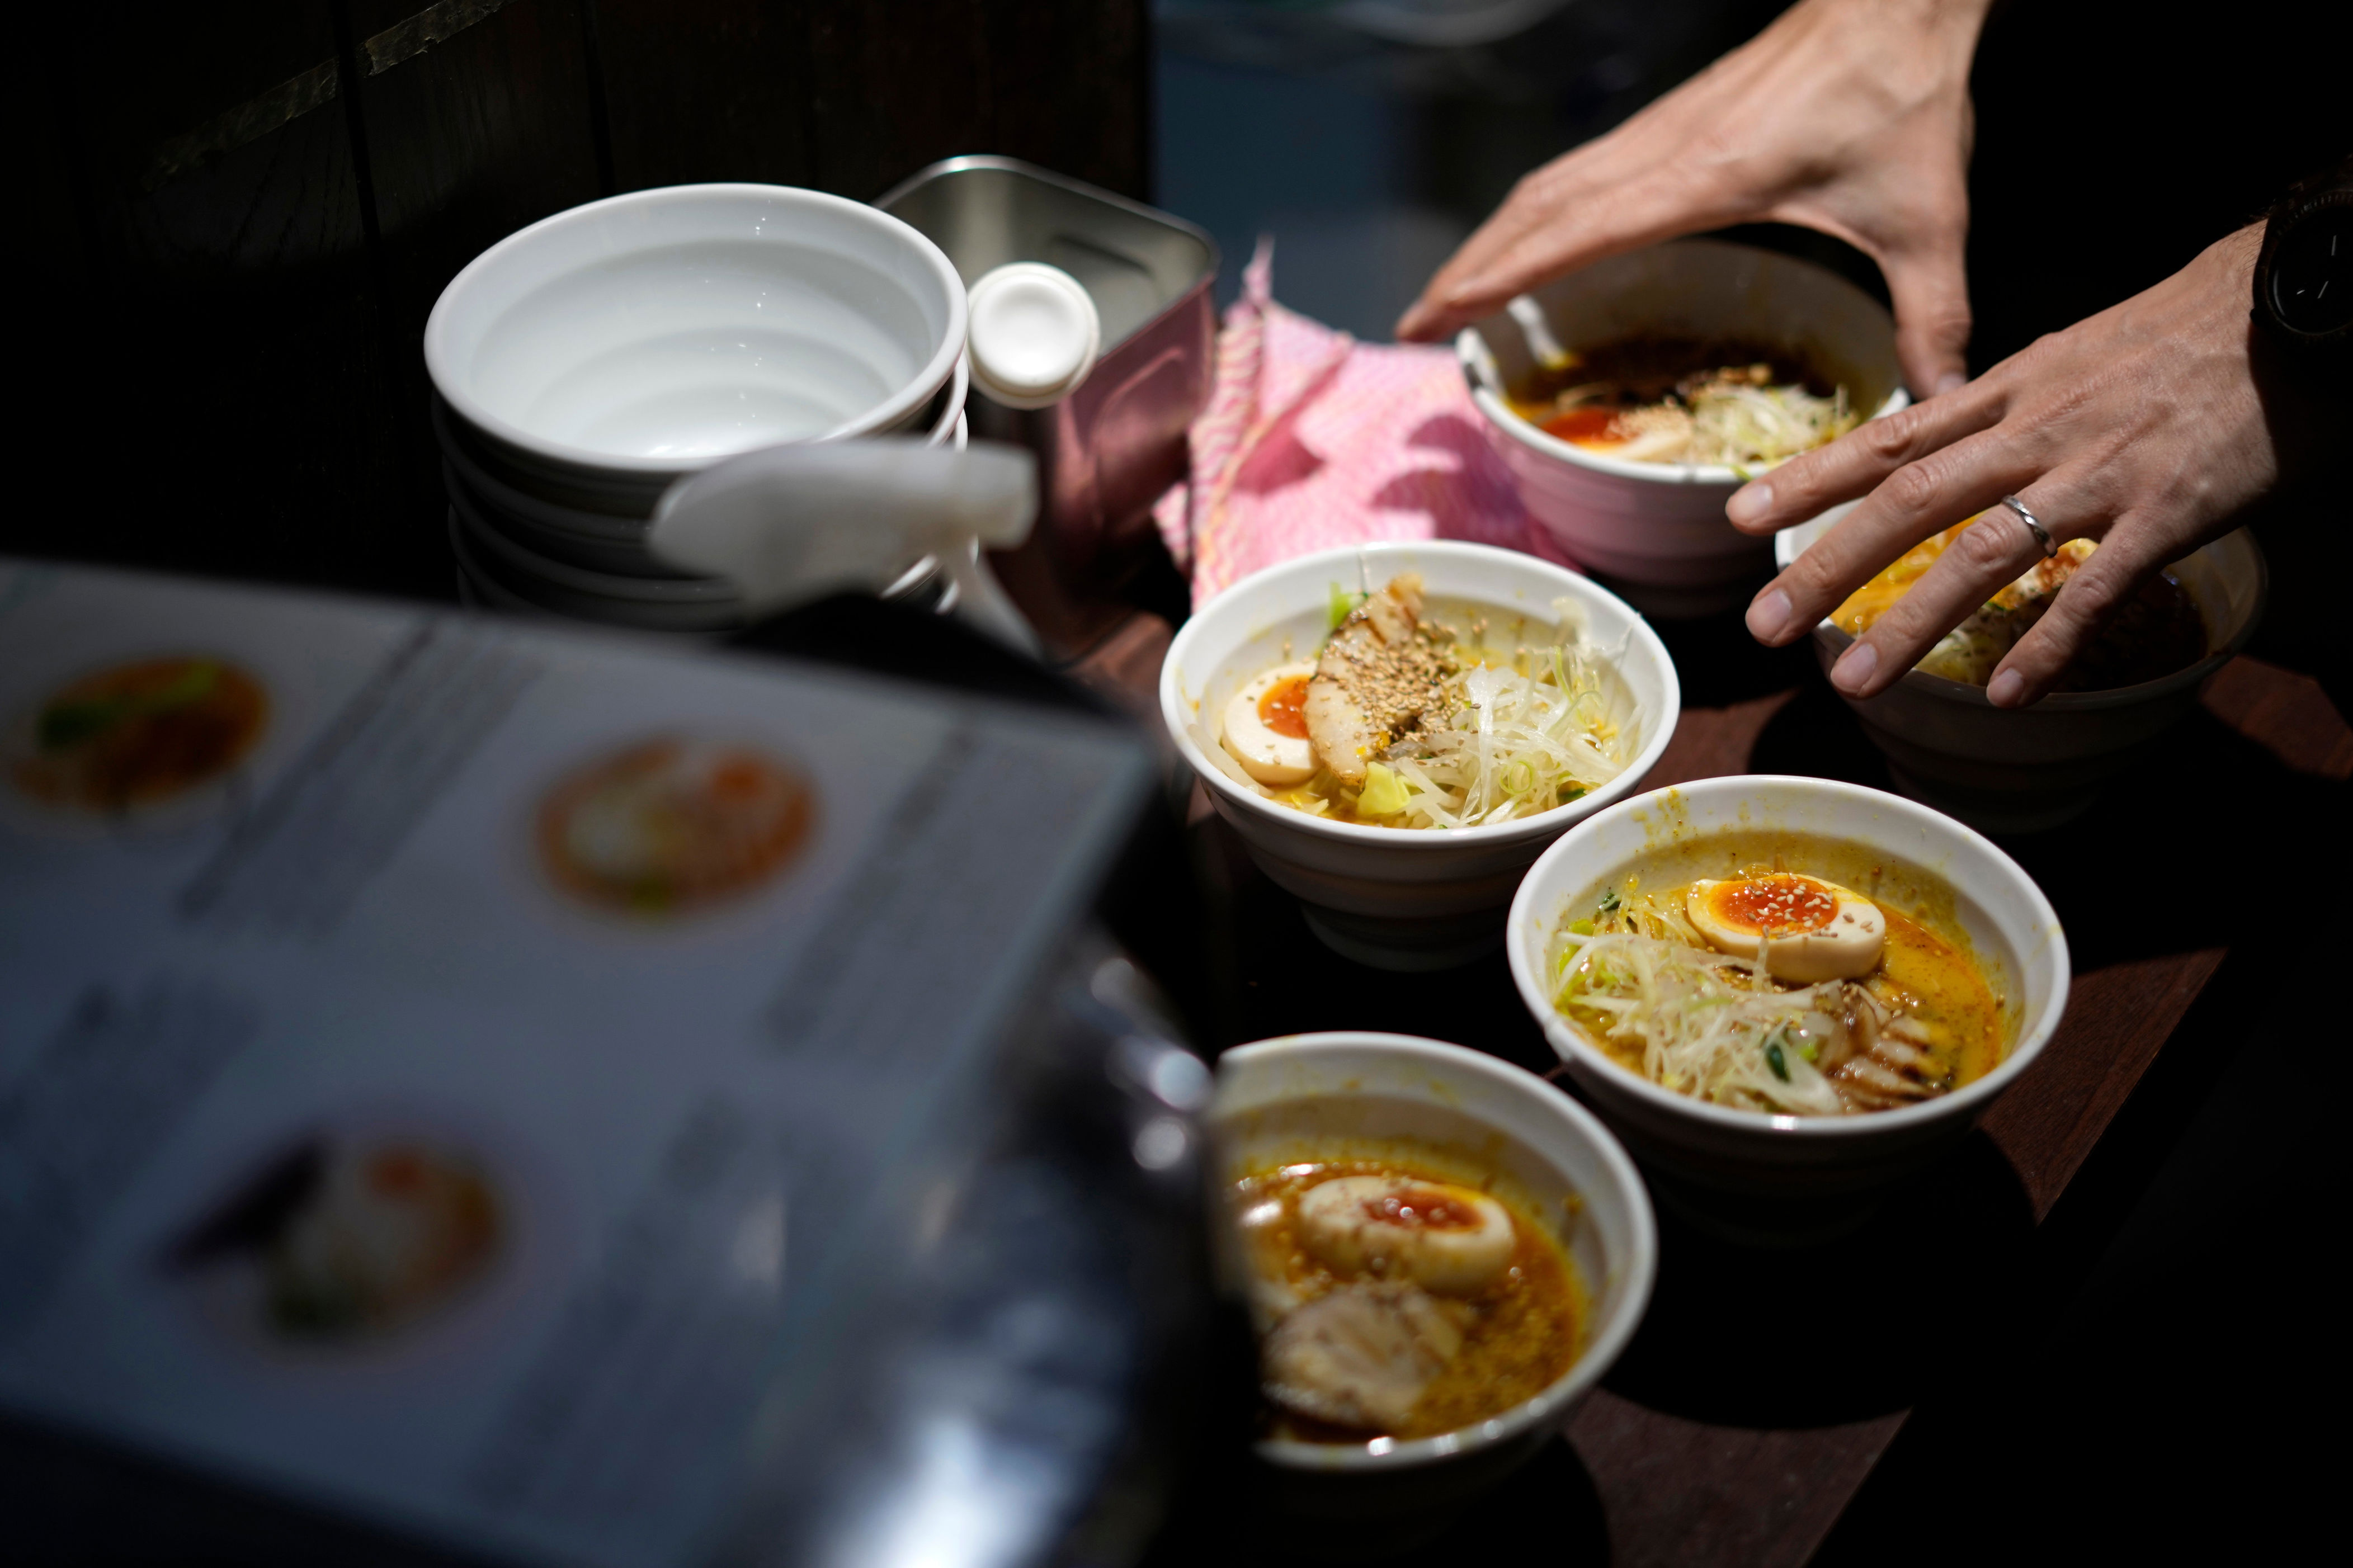 the japanese dish that has become a tourist attraction for thousands: ‘it’s a way of life’